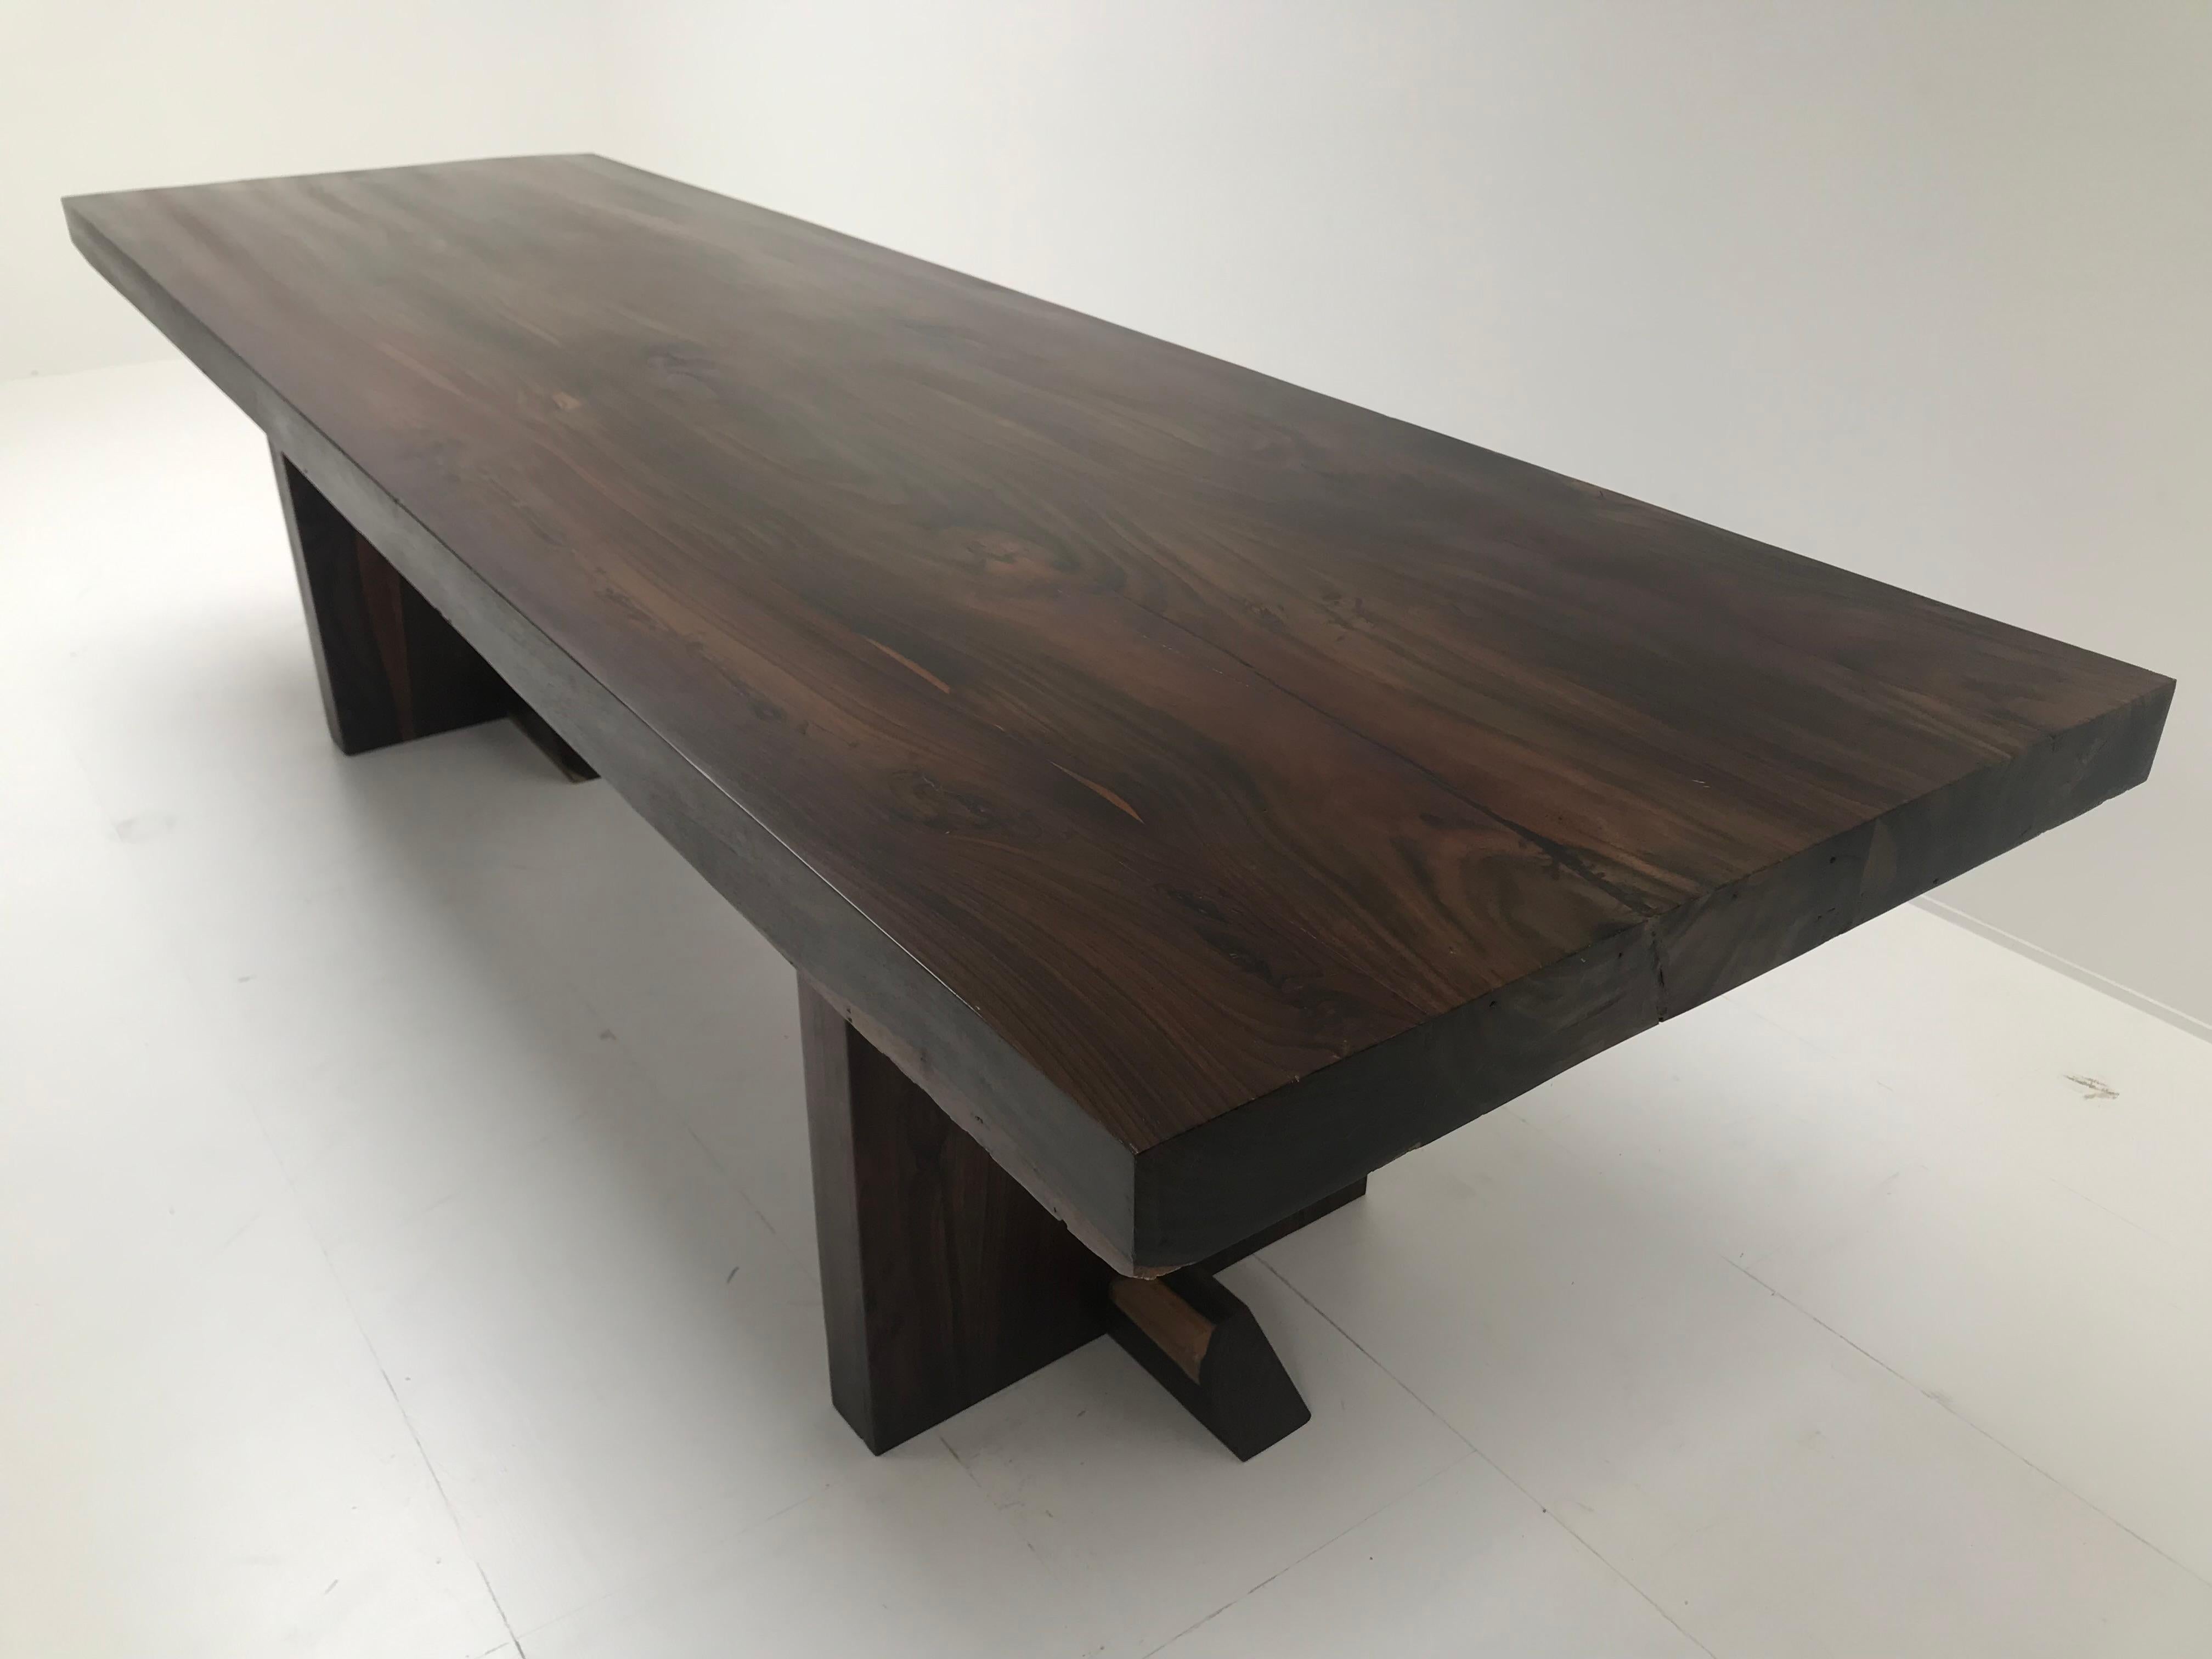 Exceptional Modern Table in a Polished Beechwood,wooden square feet,

great shine of the wood, very simple but powerful design,

Can be used as a dining table or as a writing desk.